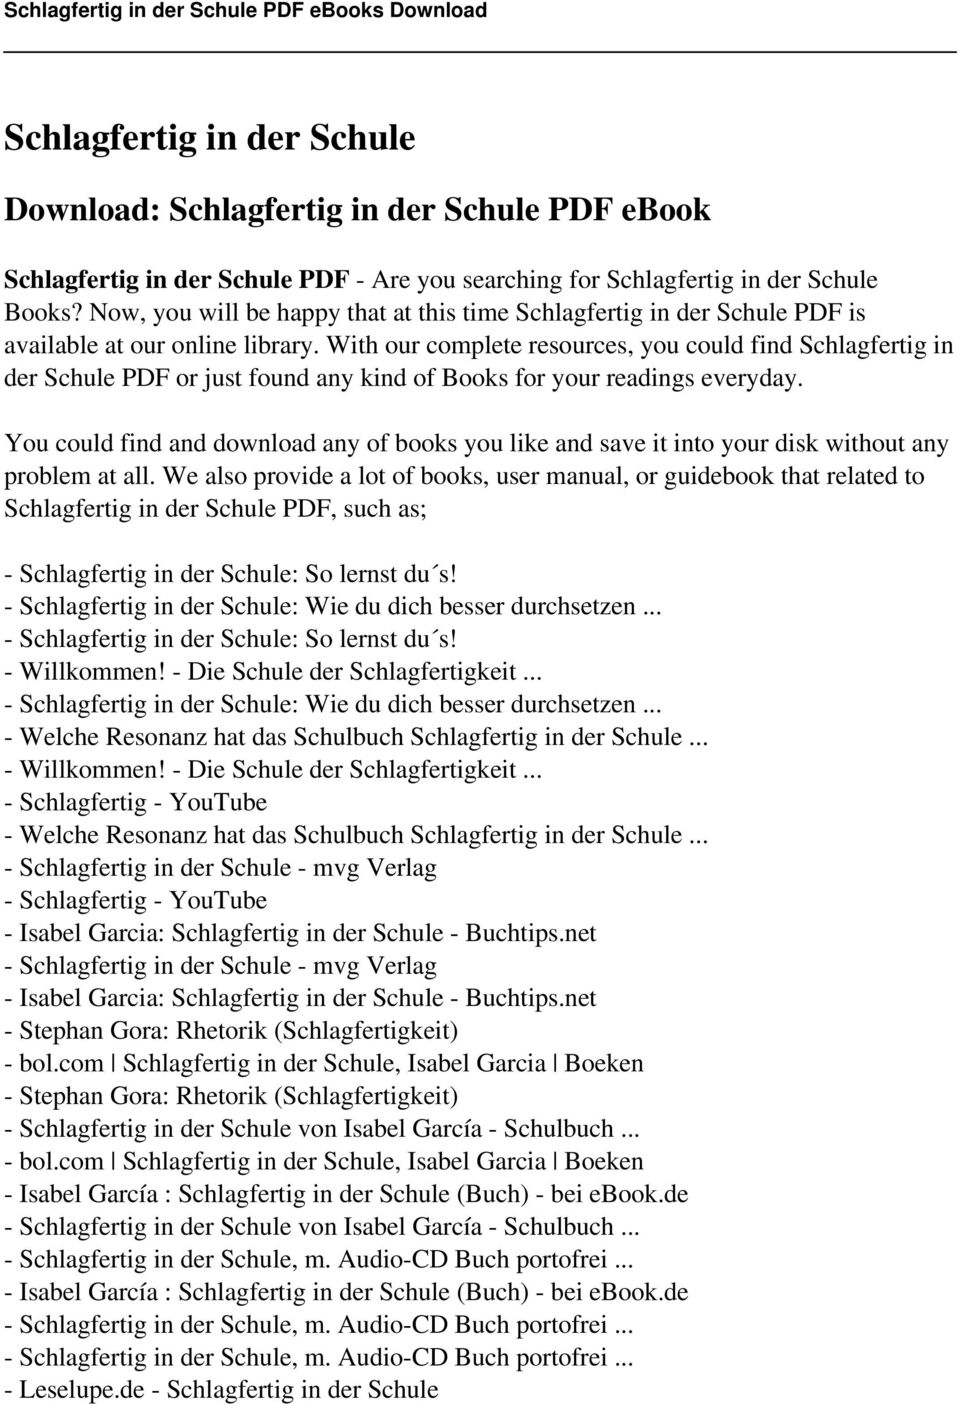 With our complete resources, you could find Schlagfertig in der Schule PDF or just found any kind of Books for your readings everyday.